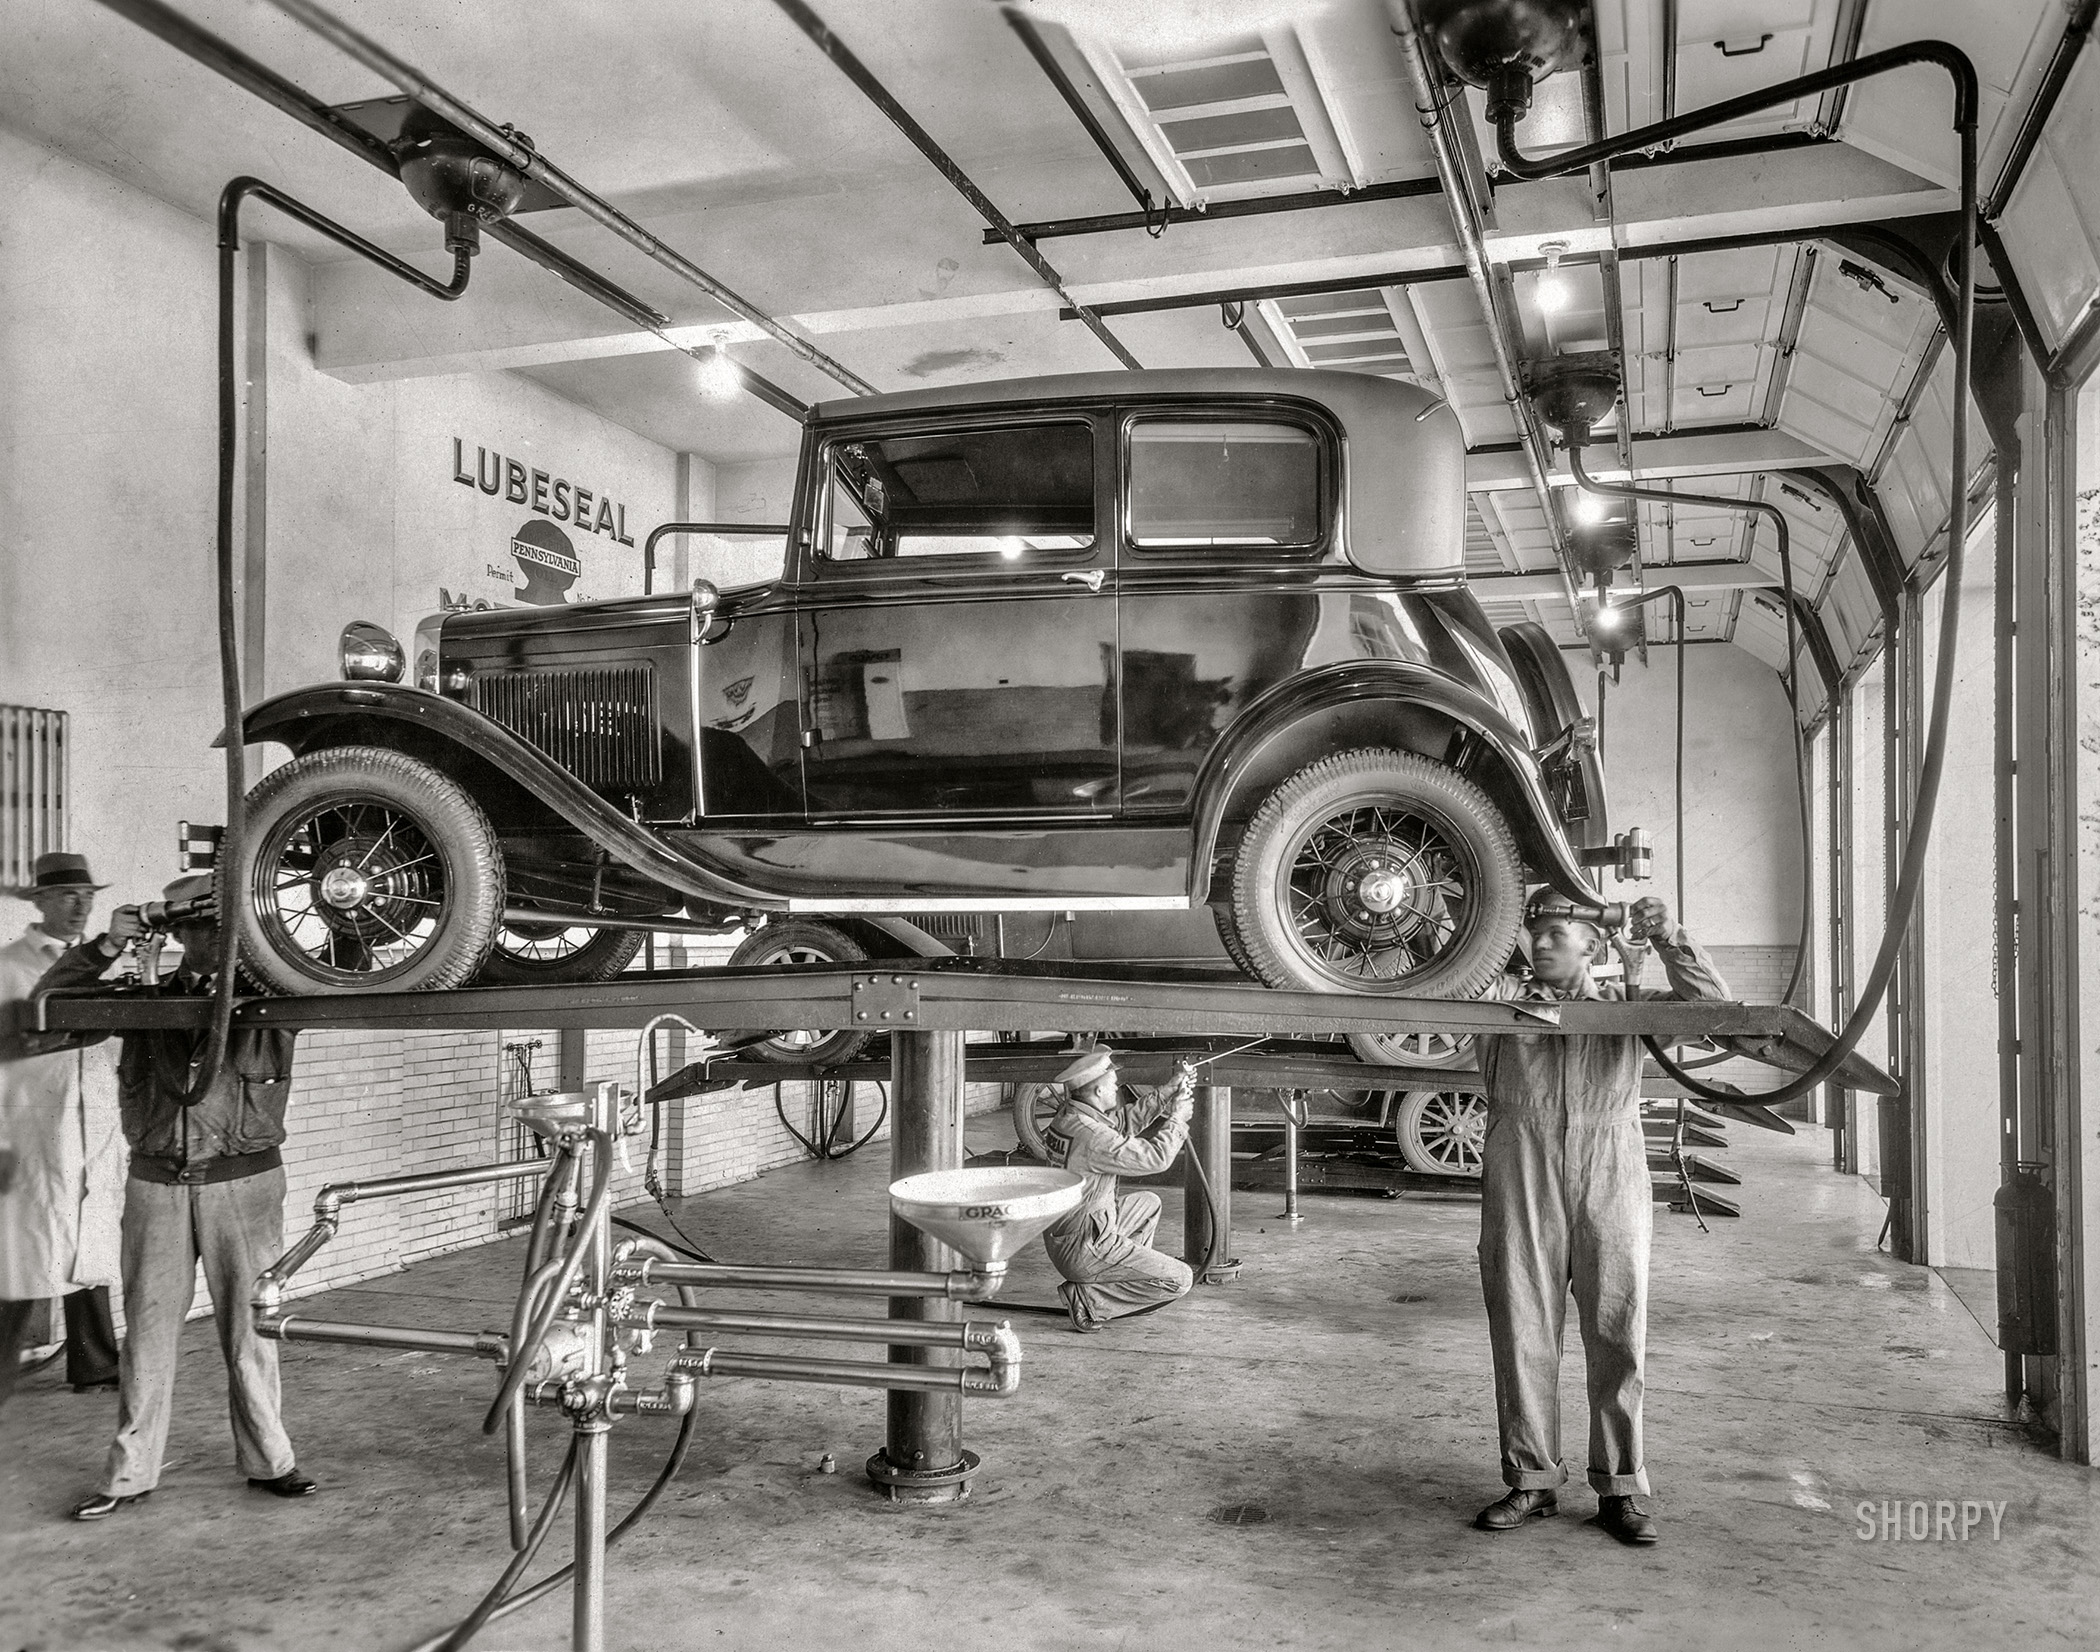 Circa 1930. "Ford Model A on lubrication rack at Lubeseal service garage." View full size.
